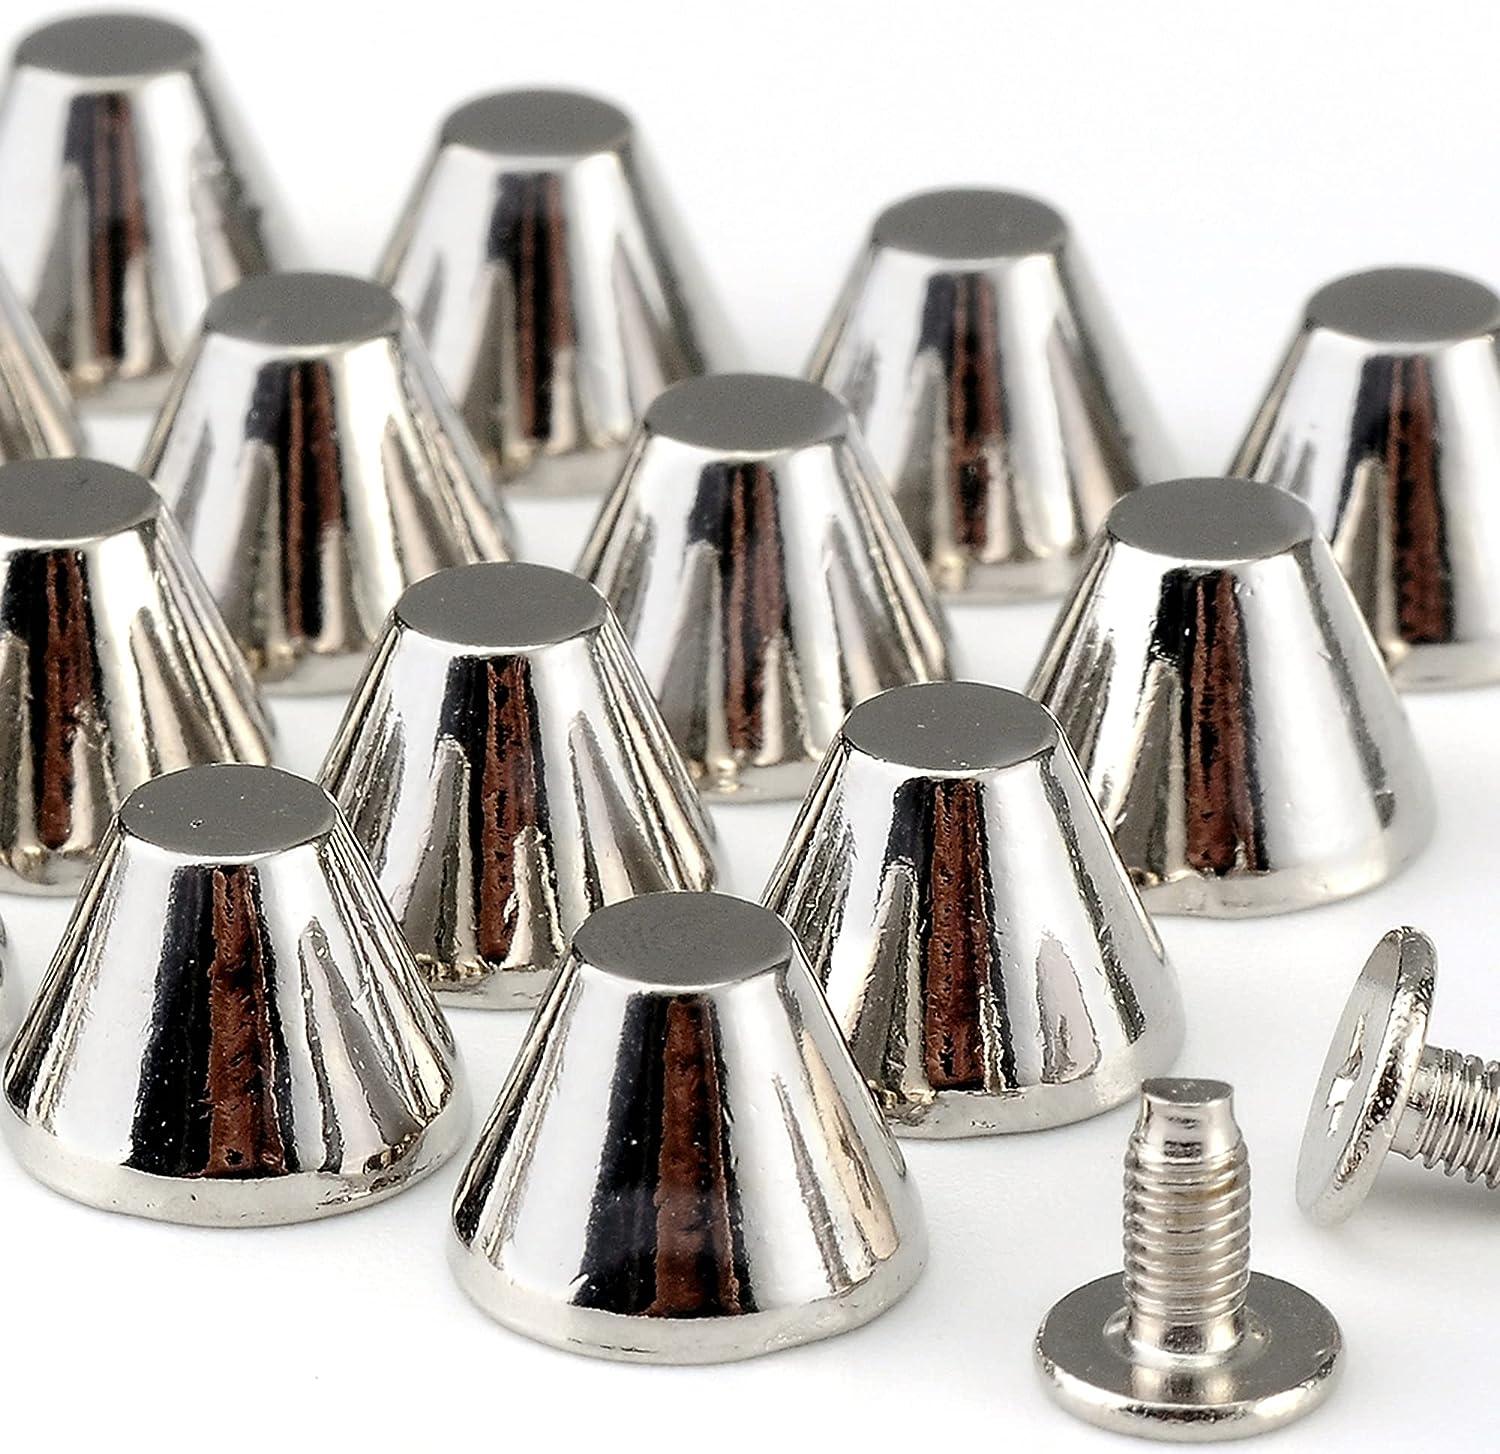 YORANYO 30 Sets 5/16 Height Spikes and Studs 8MM Handbag Feet Silver Color  Barrel Spikes